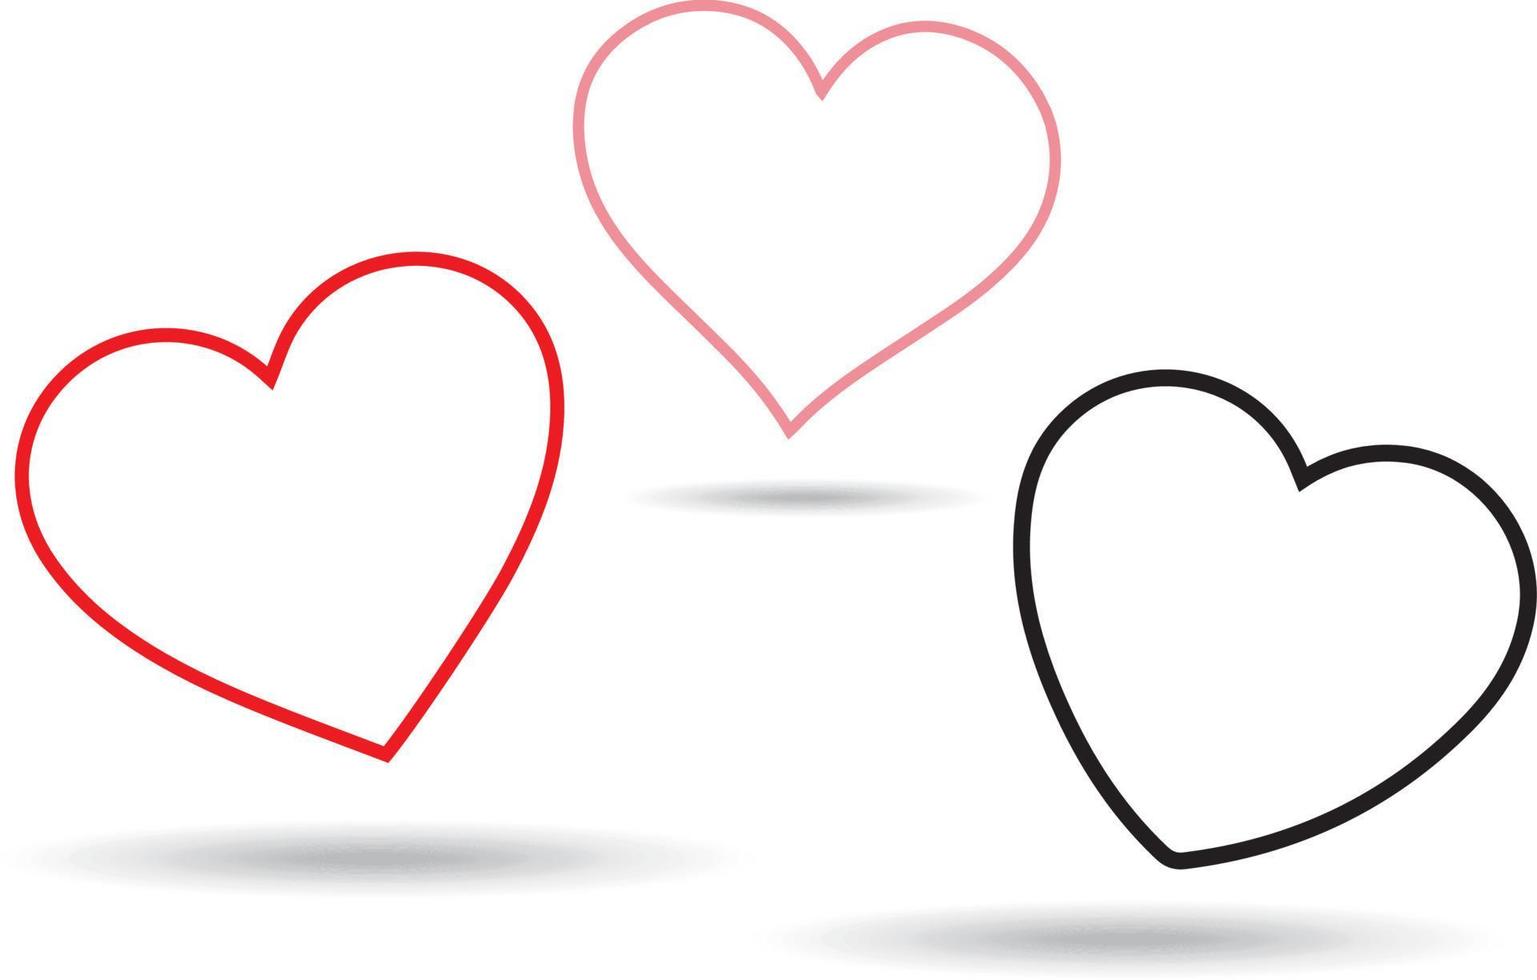 Collection of heart illustrations, Love symbol icon set vector